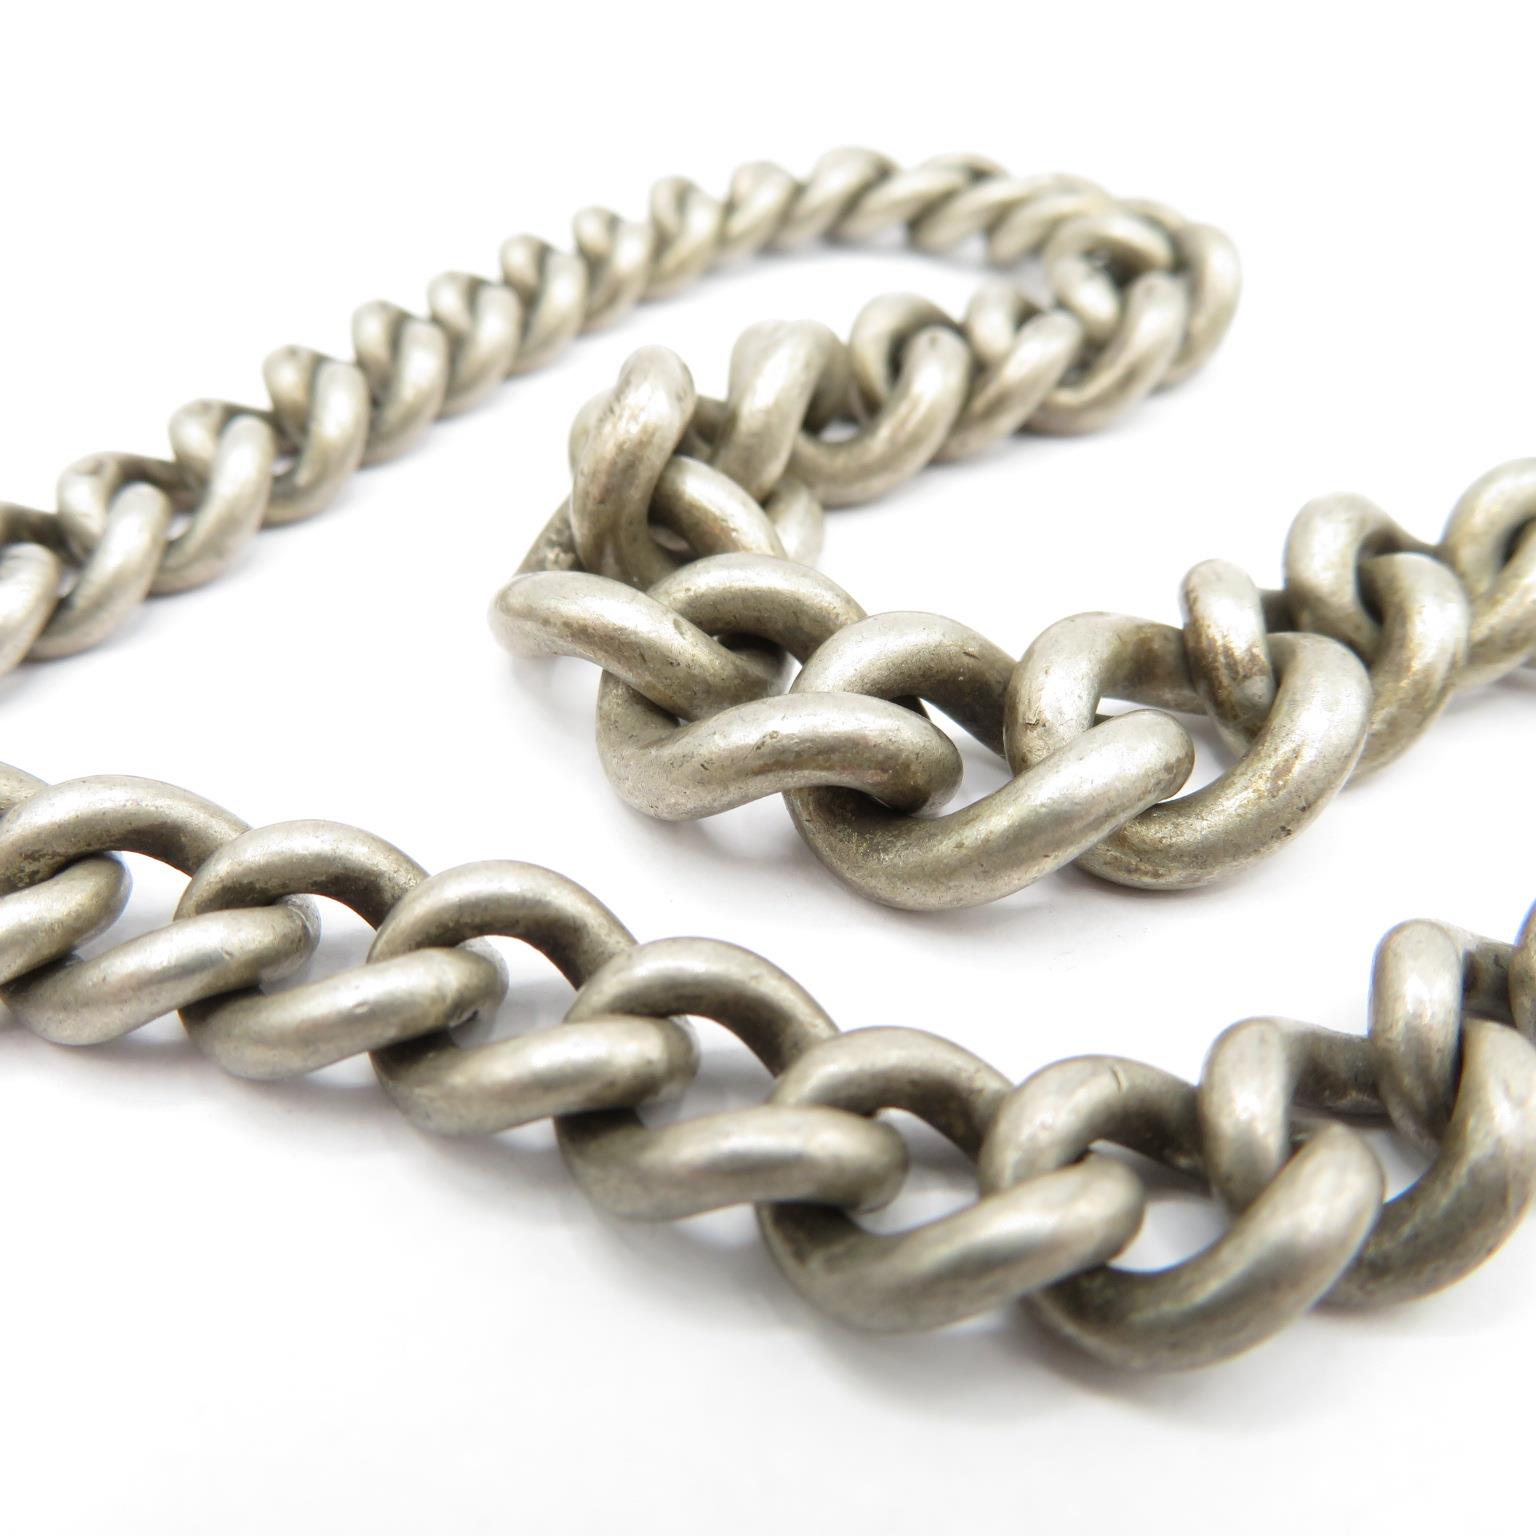 Chunky silver watch chain - 1x dog clip damaged - chain measures 38cm long 74g - Image 2 of 3